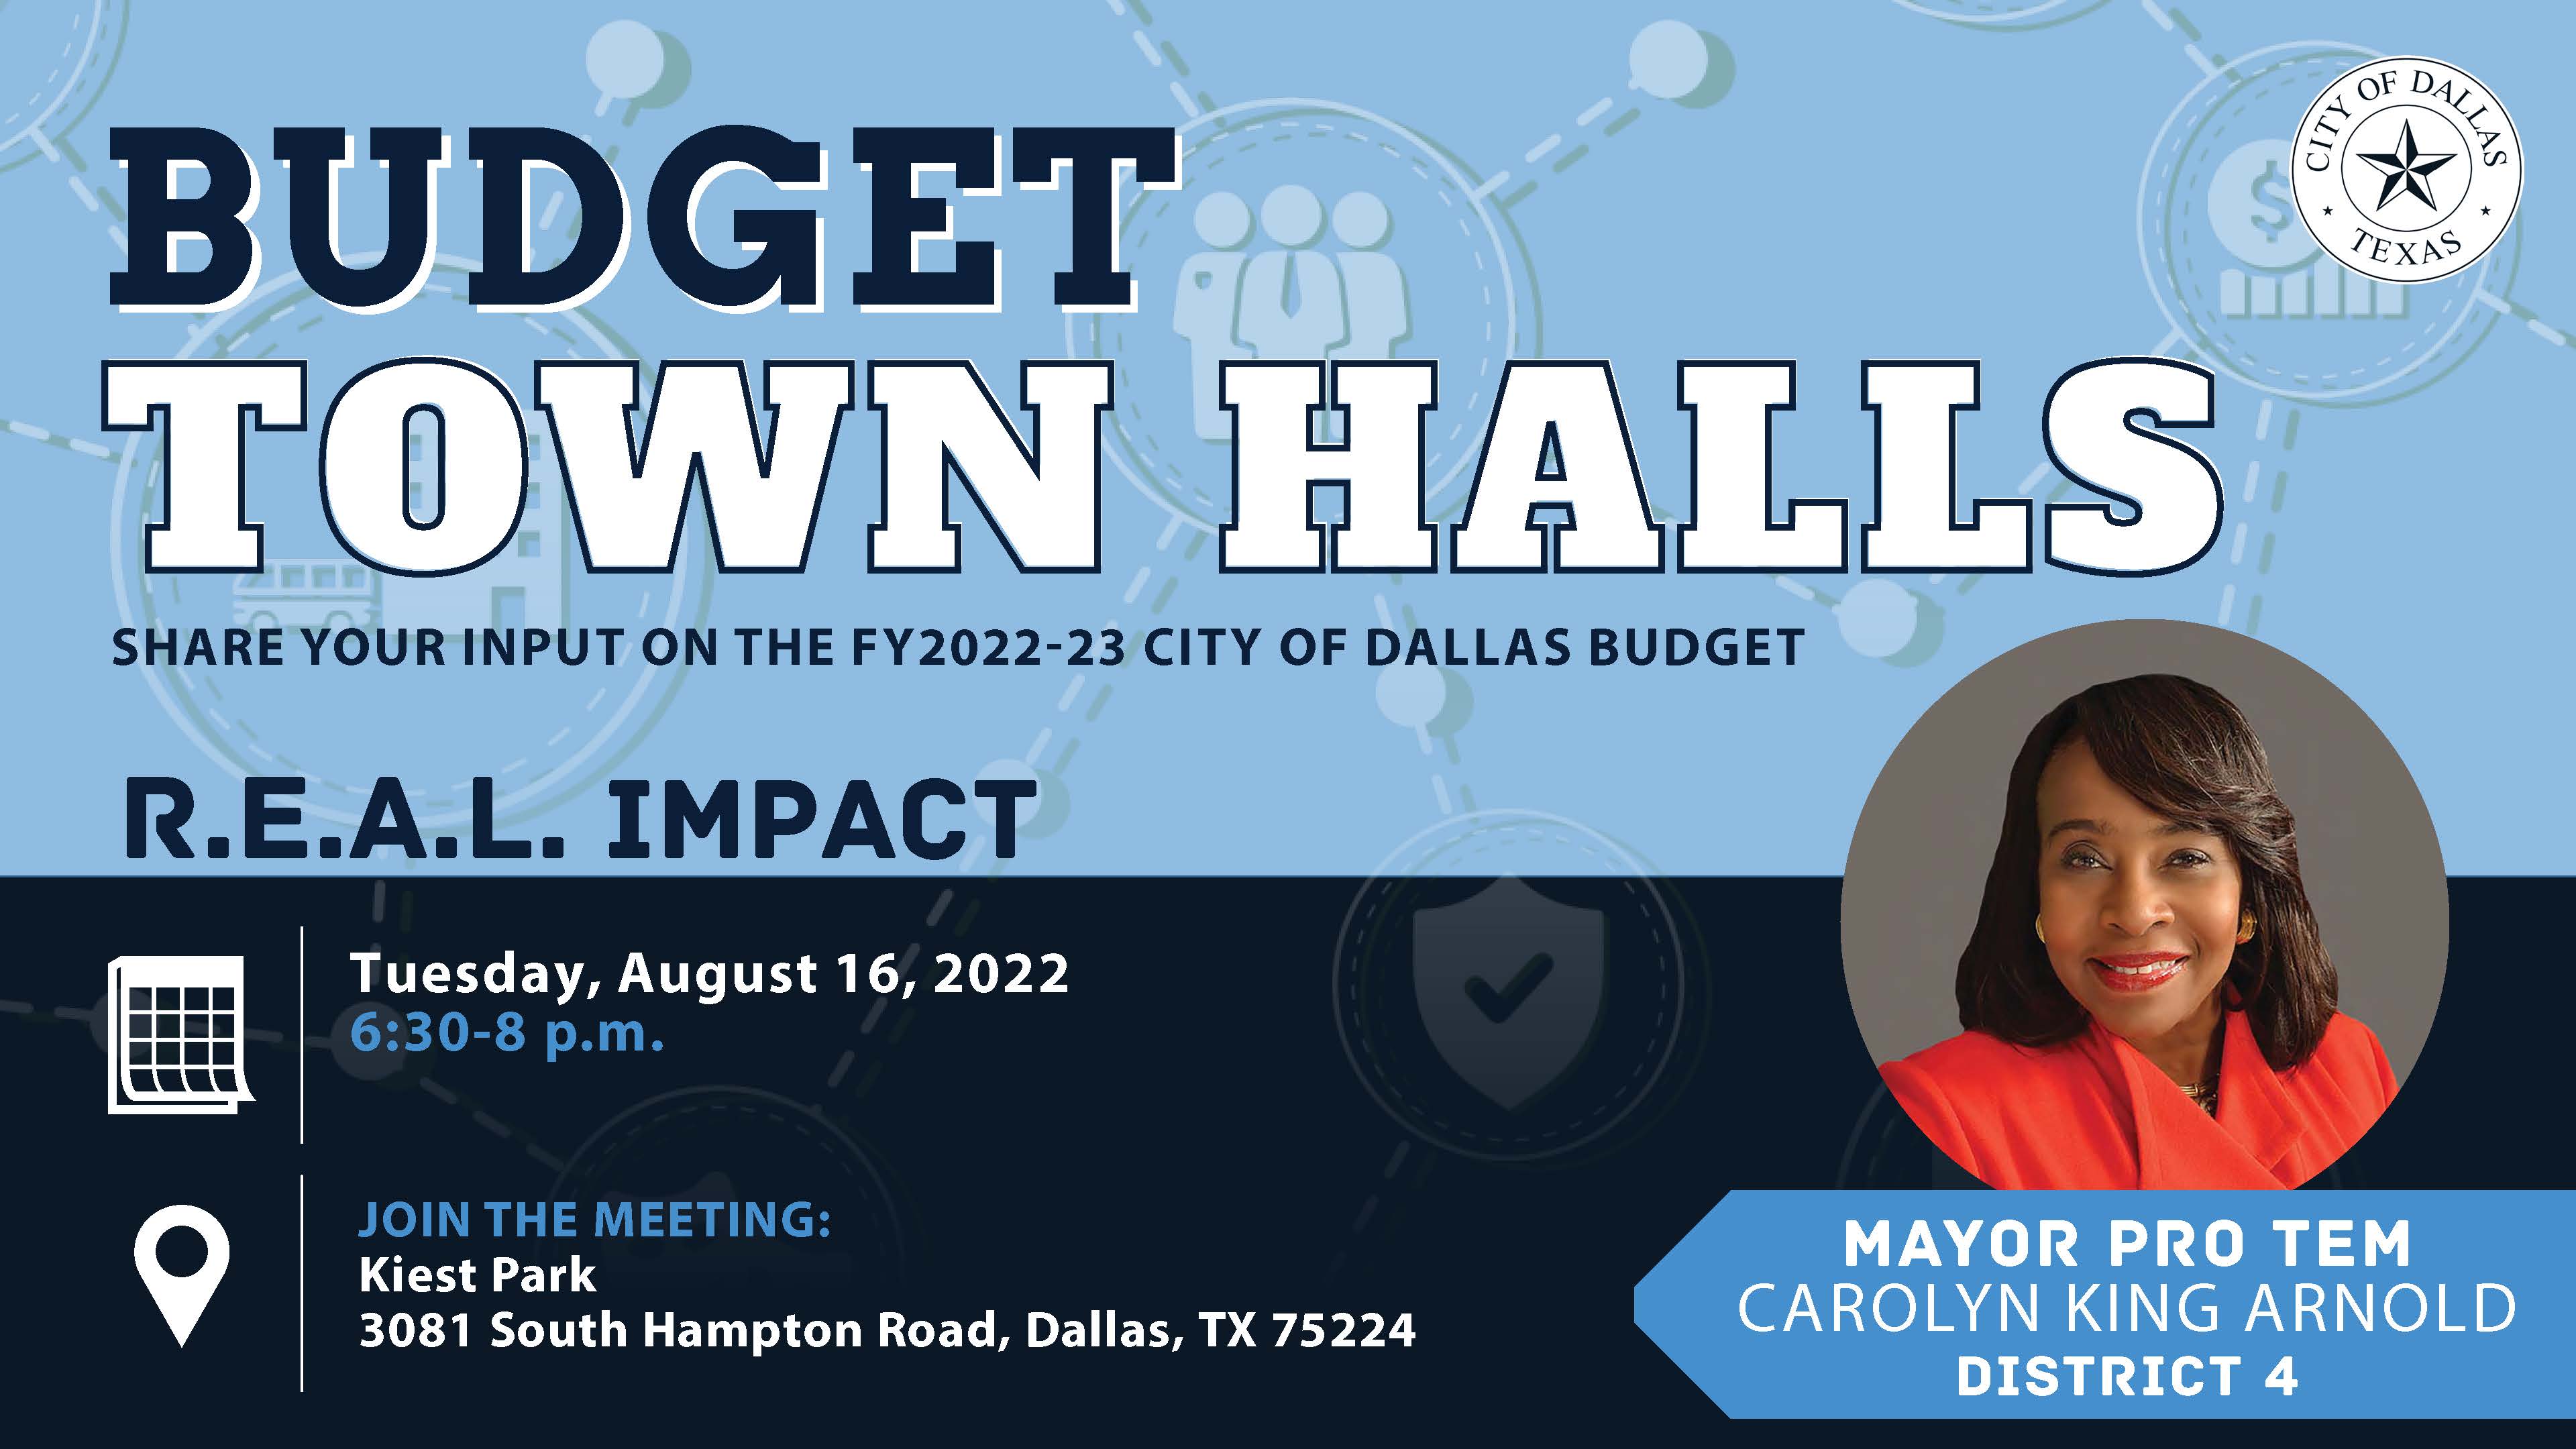 Budget Town Hall Meeting Flyer District 4 8.16.22.jpg